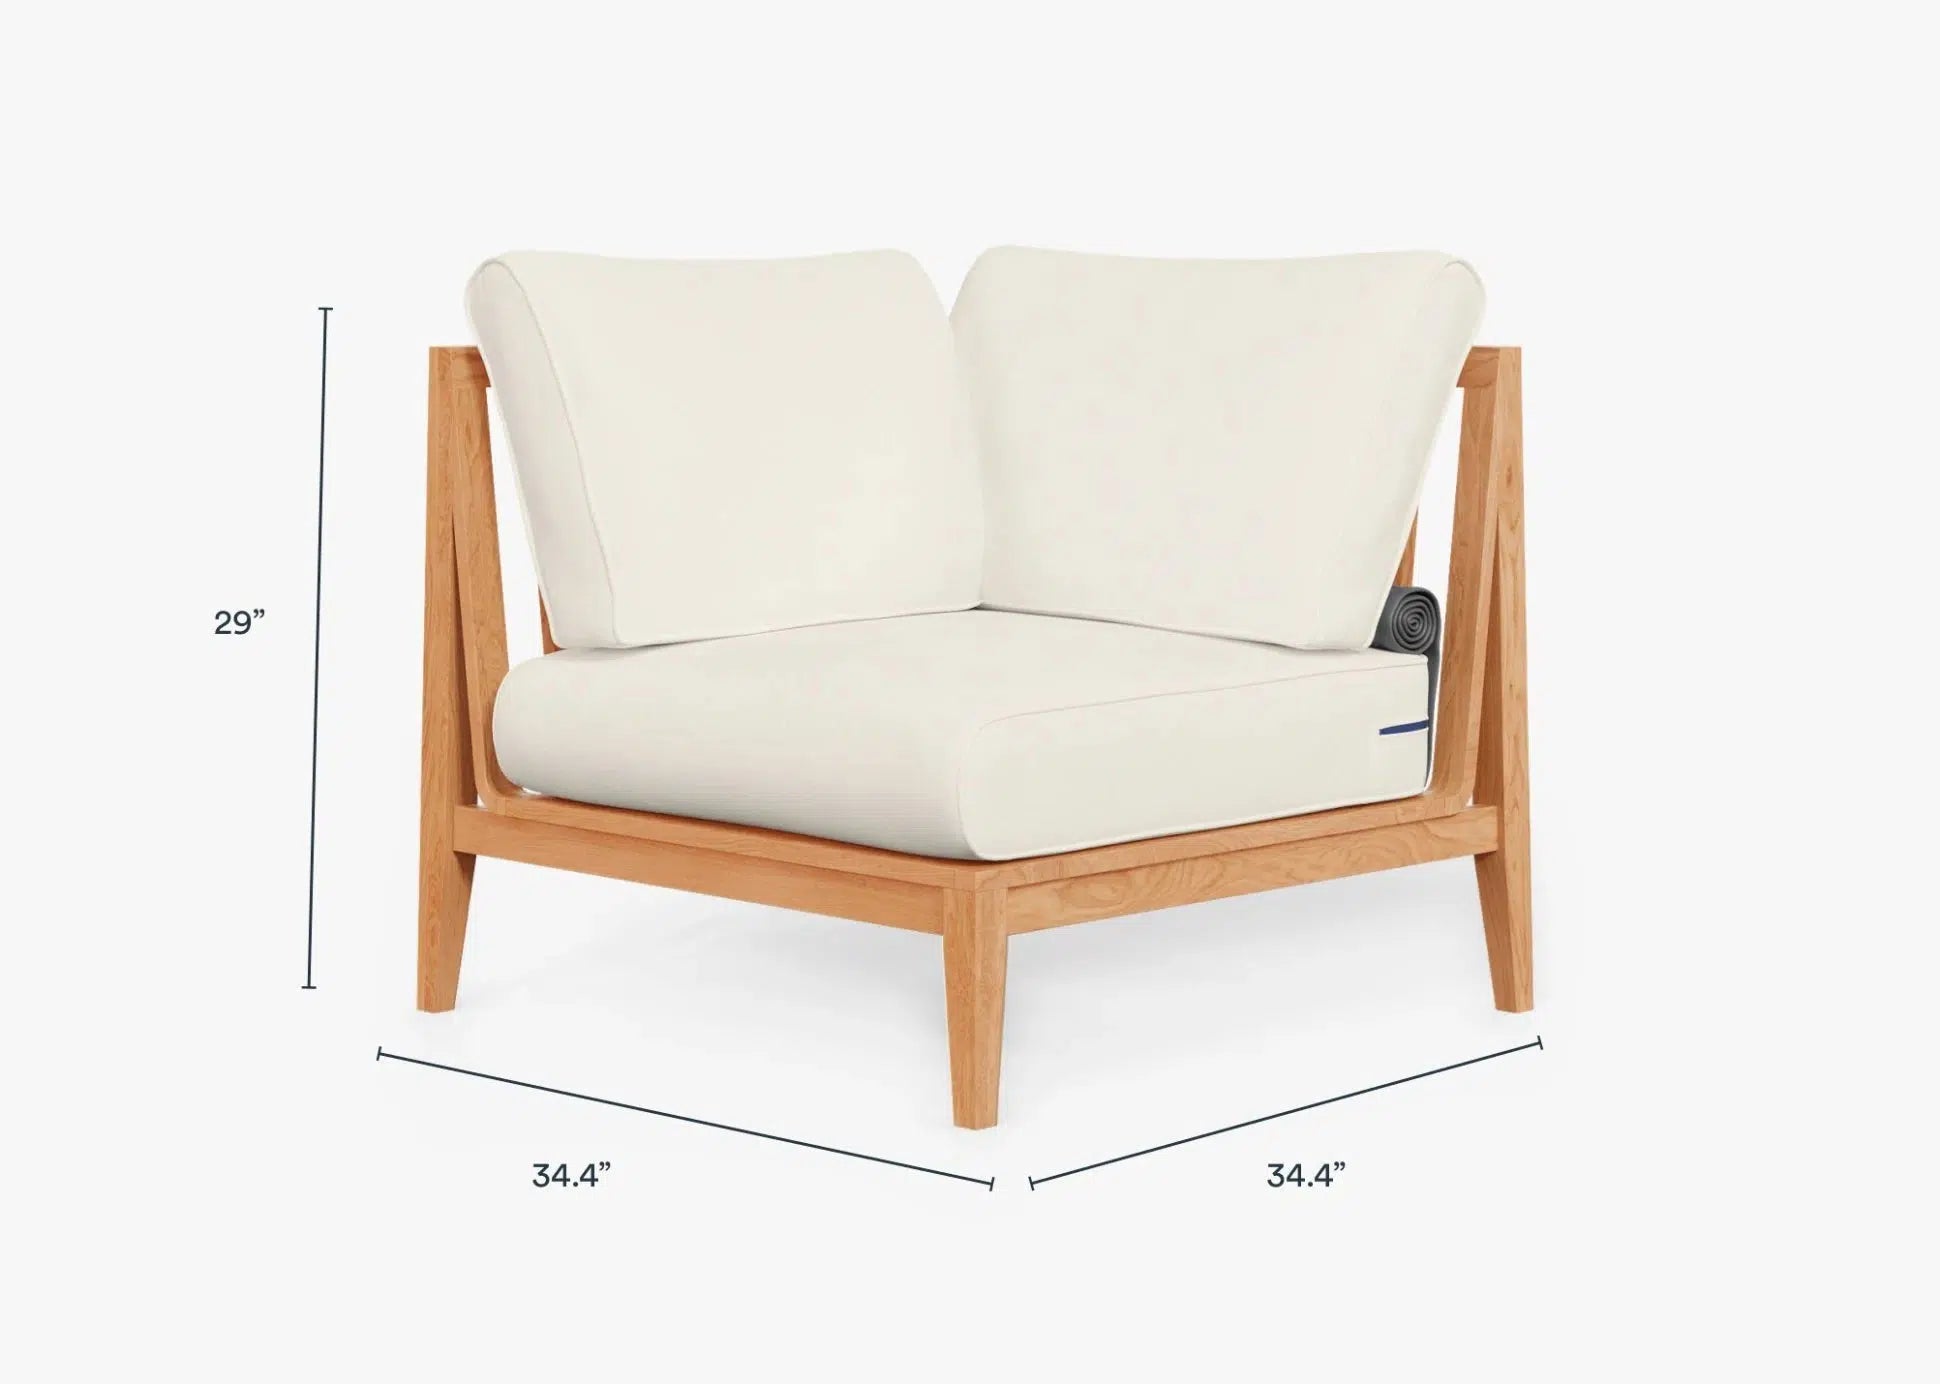 Live Outer 34" Teak Outdoor Right Corner Chair With Palisades Cream Cushion